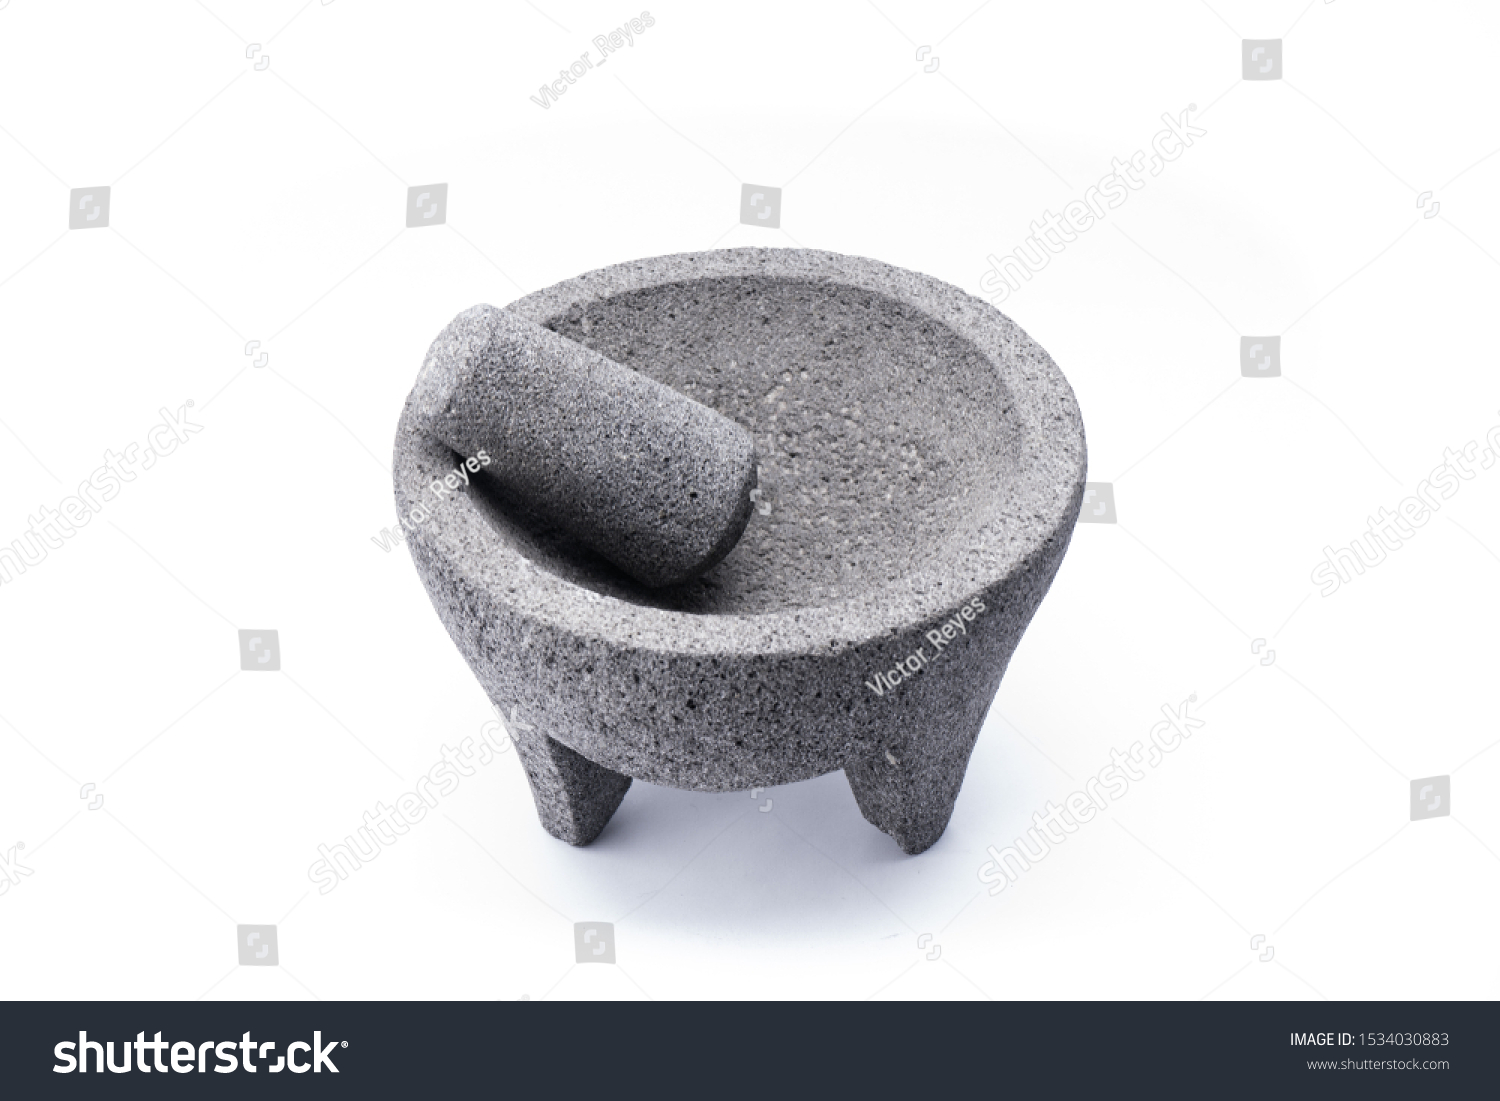 Stone molcajete used to grind vegetables and prepare typical Mexican foods #1534030883